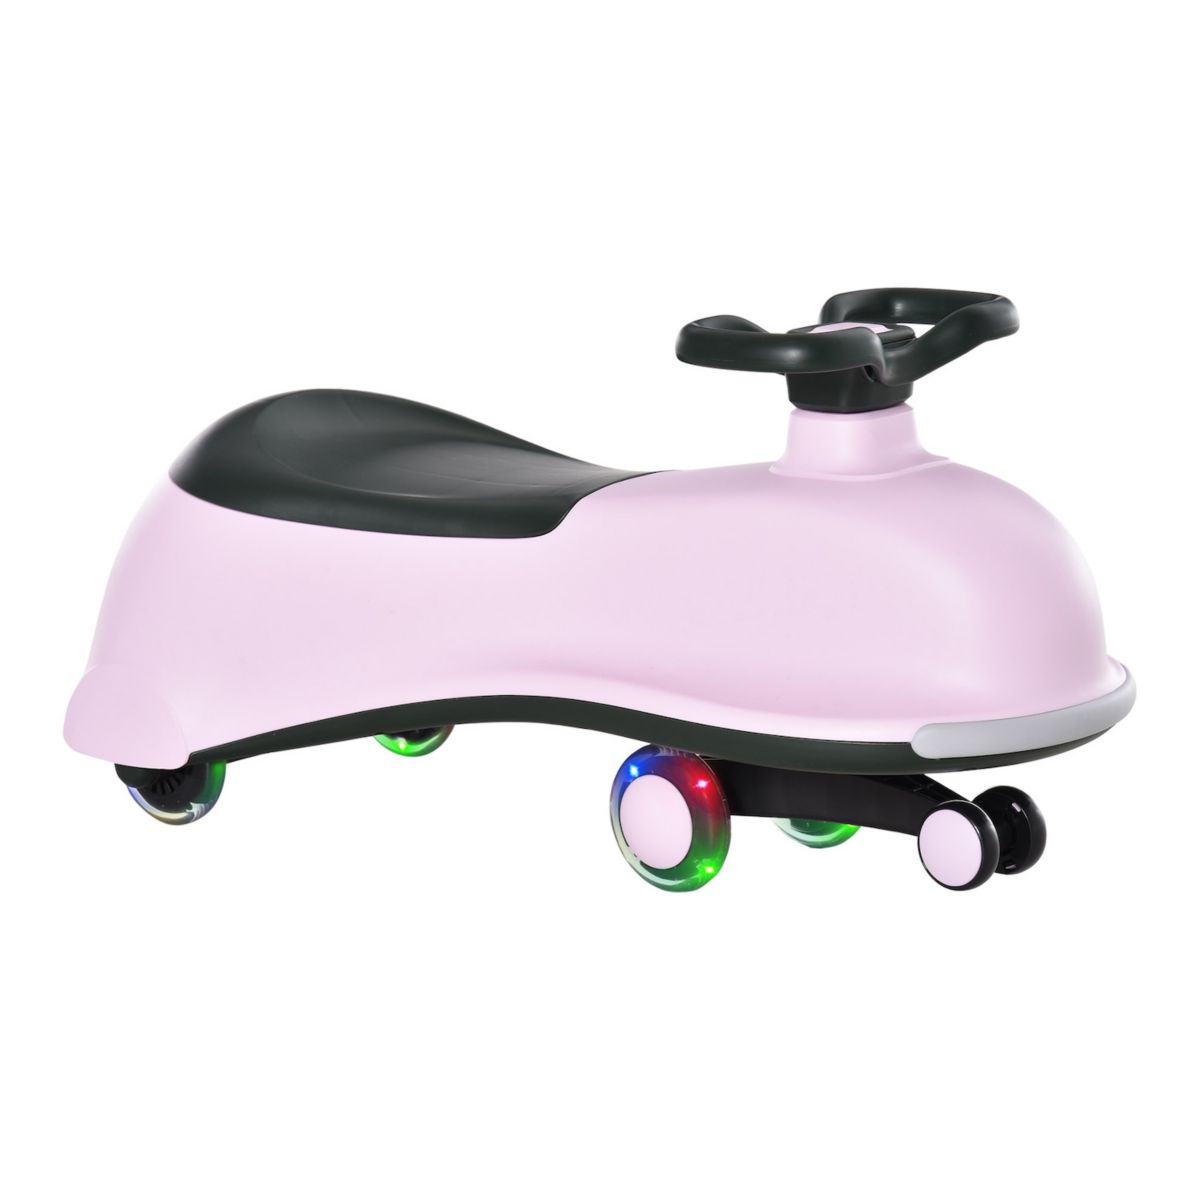 Qaba Ride on Wiggle Car w/LED Flashing Wheels Swing Car for Toddlers No Batteries Gears or Pedals   Twist Turn Wiggle Movement to Steer dolphin shaped Pink Black Qaba